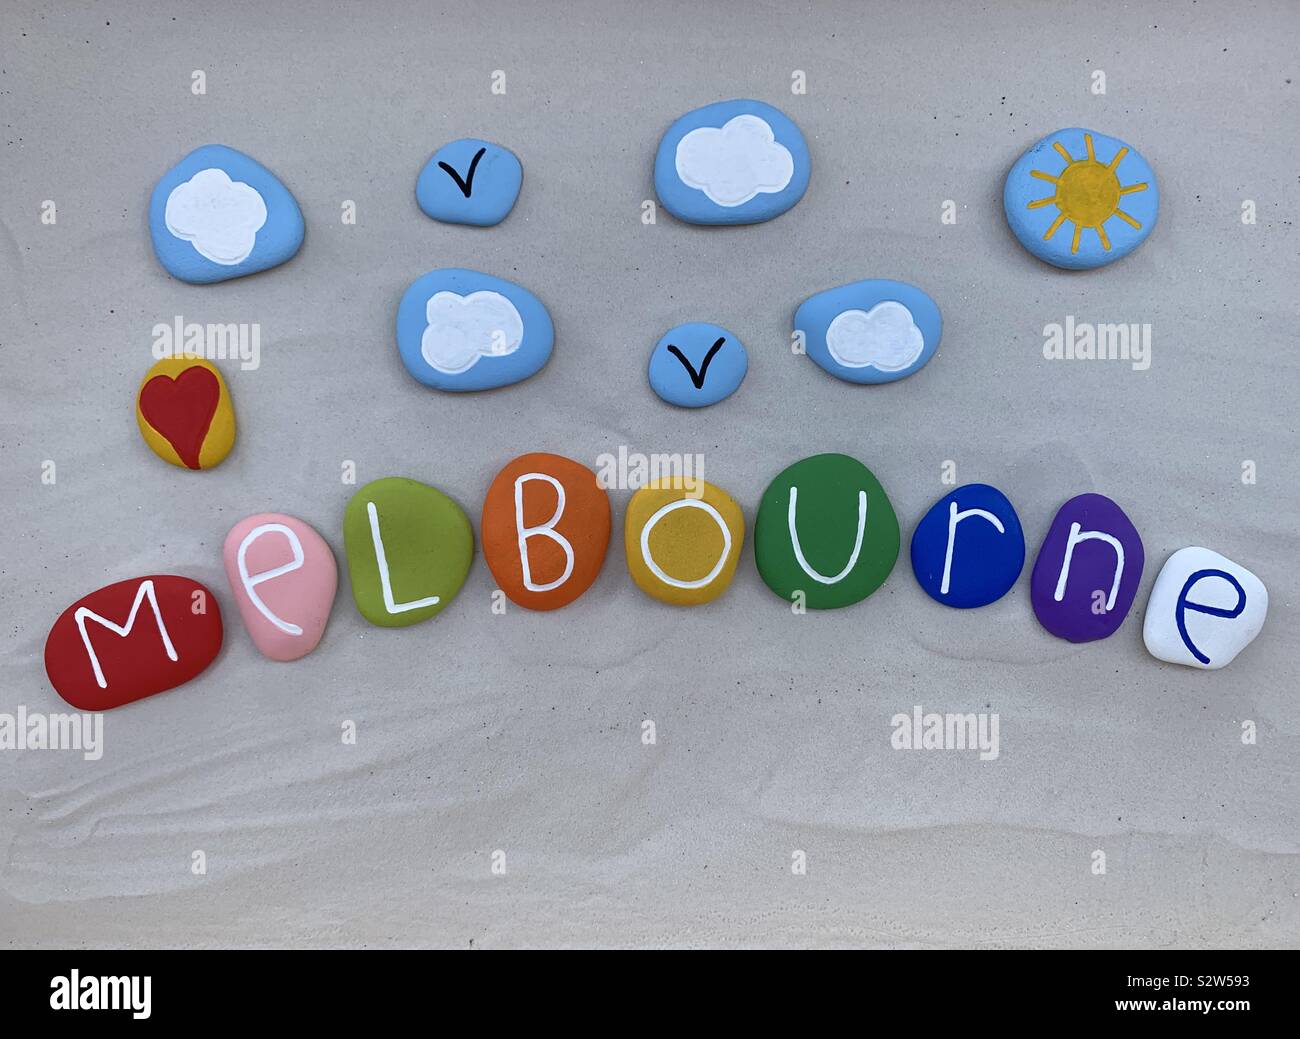 Melbourne, souvenir composed with painted stones over white sand Stock Photo